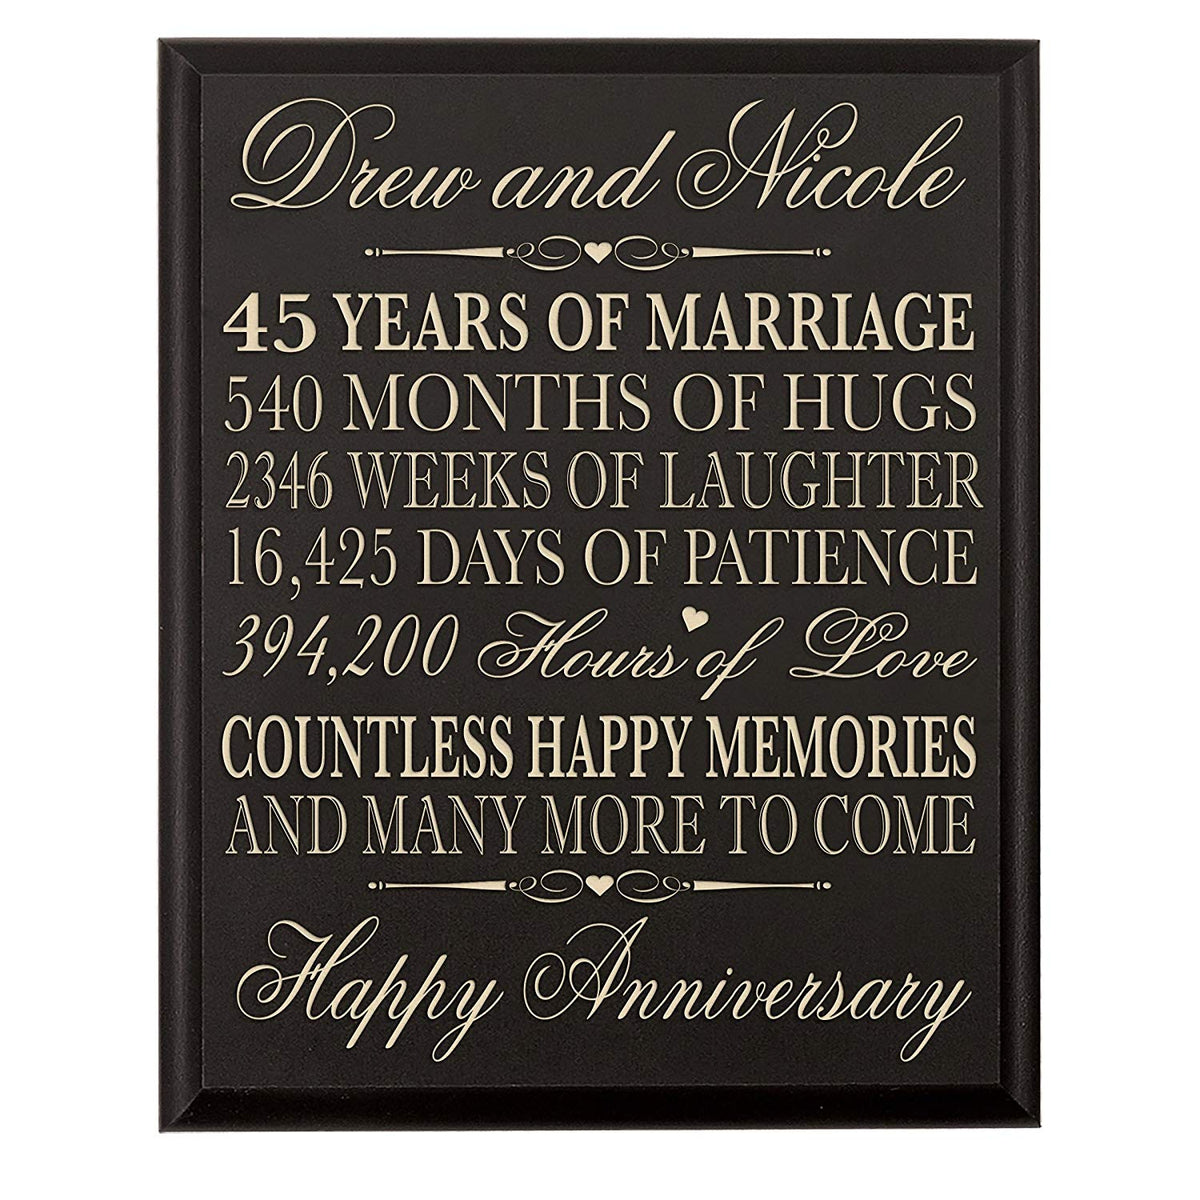 Personalized 45th Anniversary Wall Plaque Gift - Countless Happy Memories - LifeSong Milestones